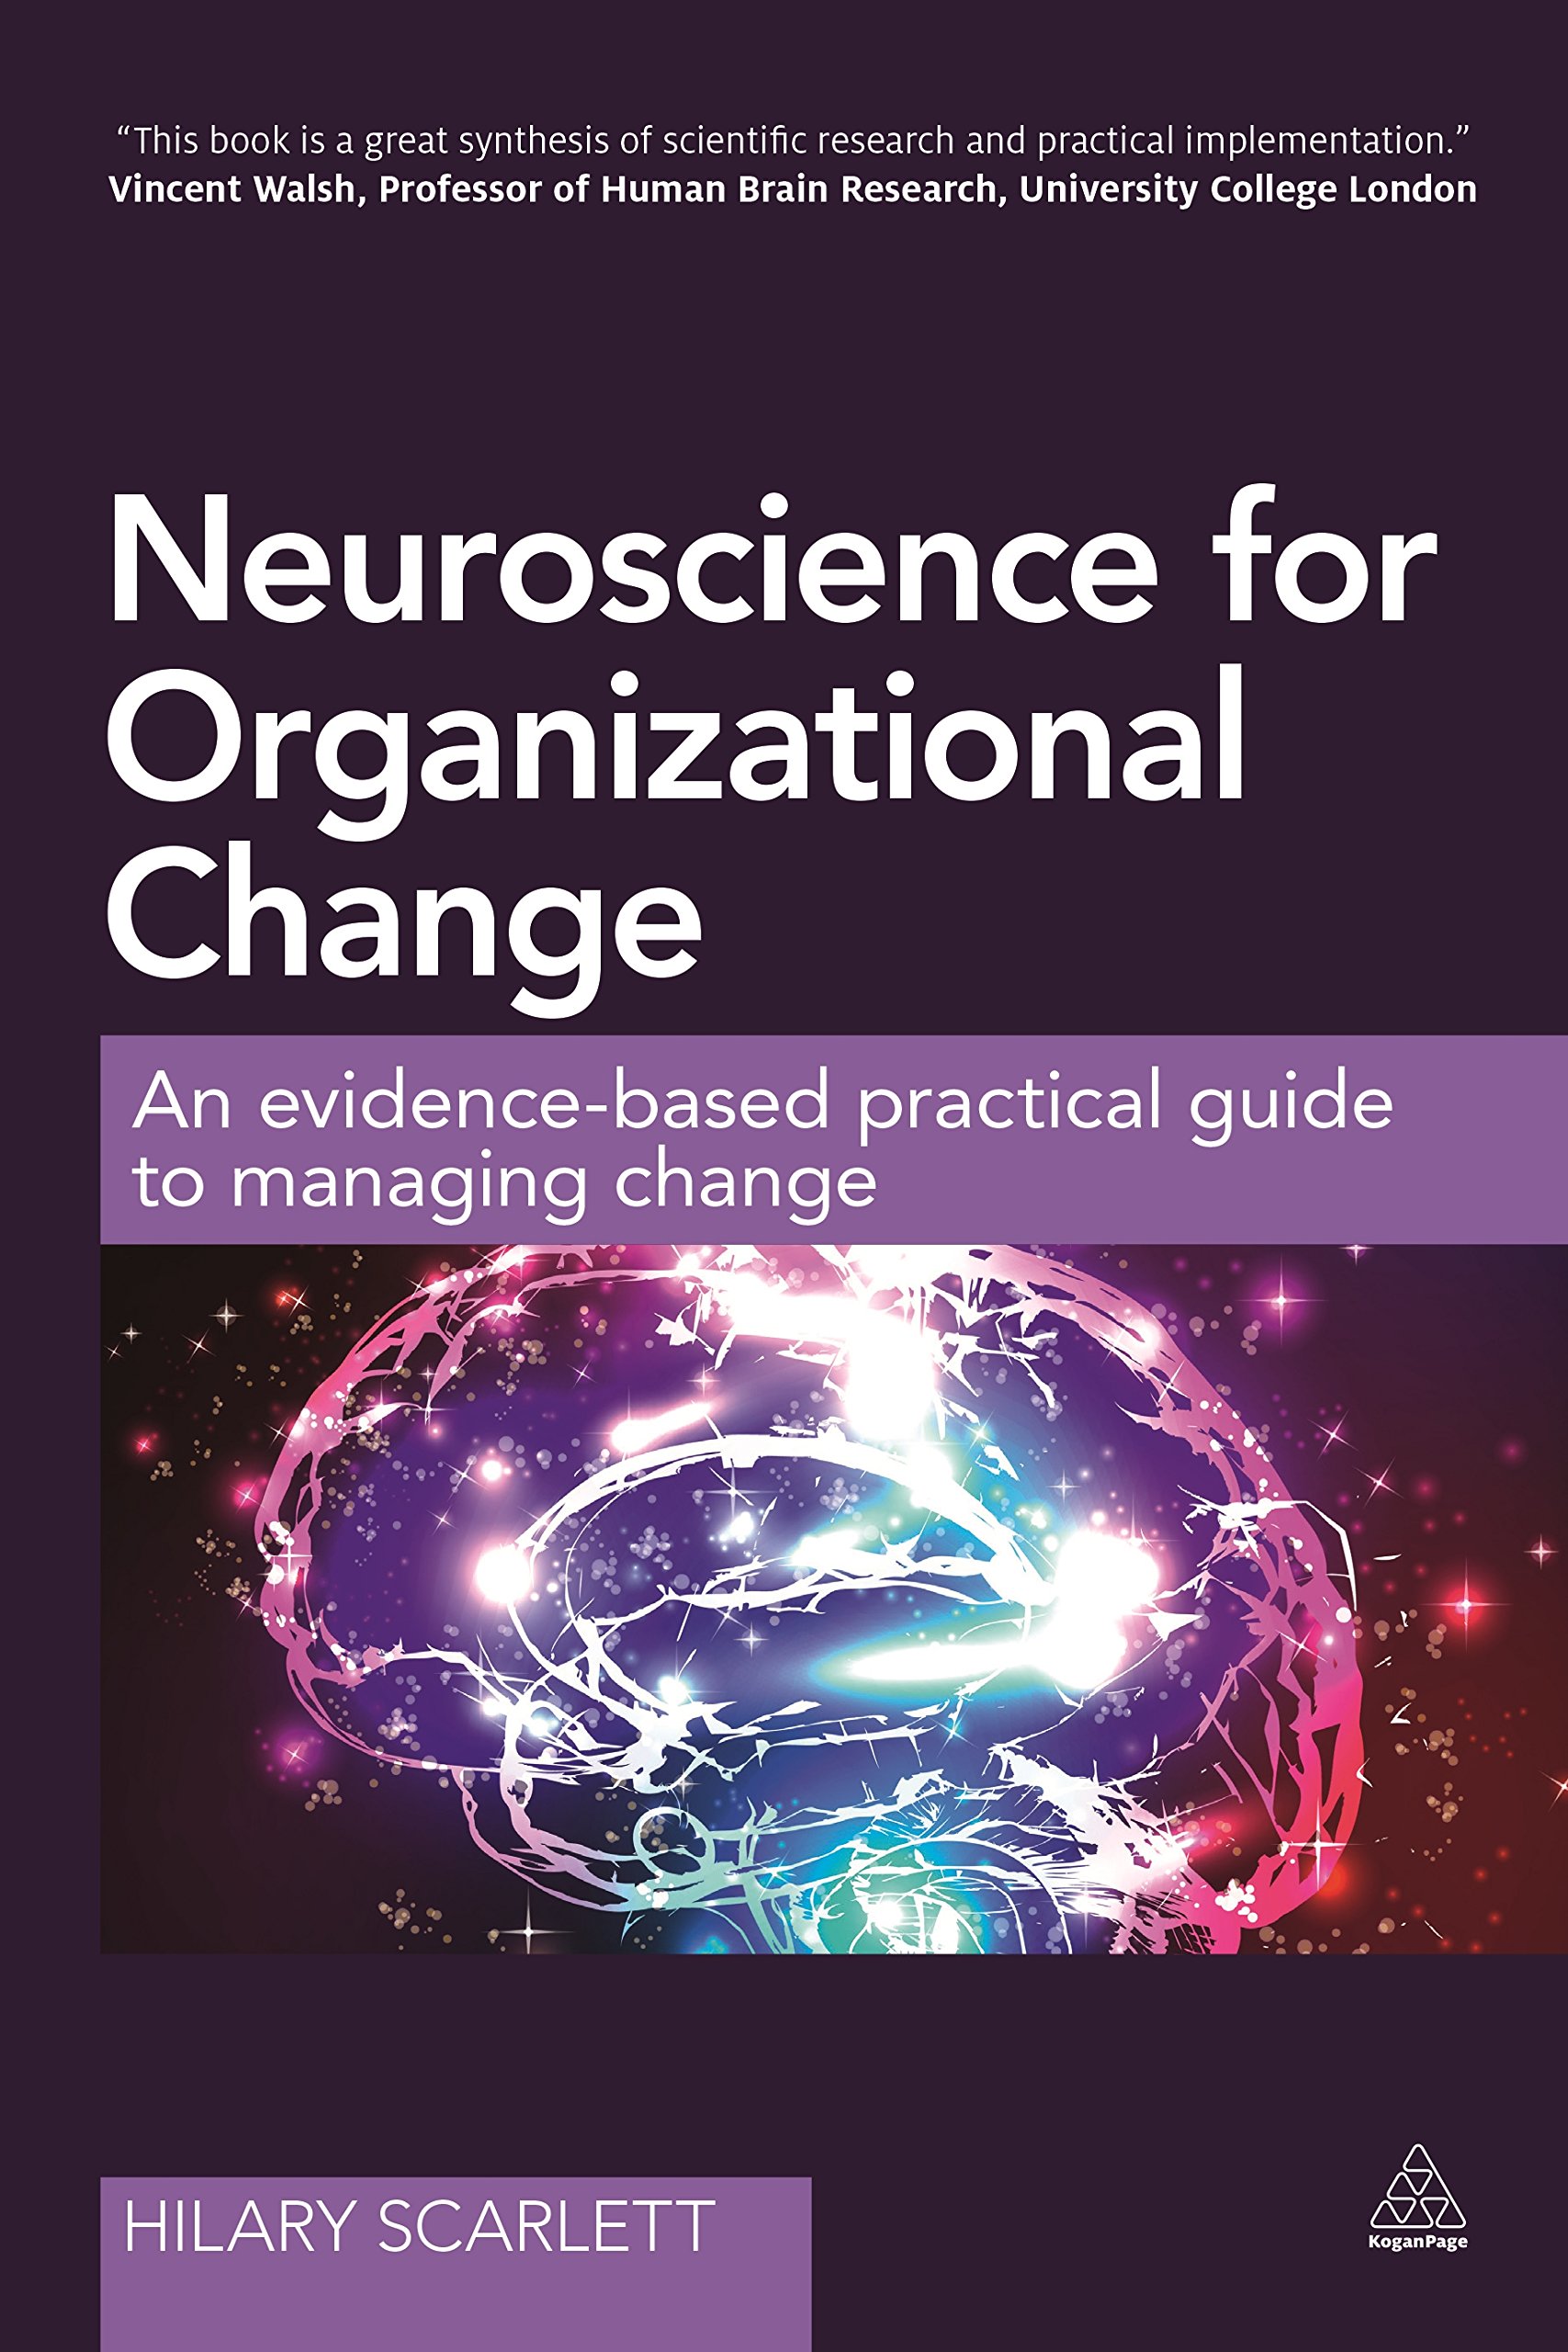 Book review: Neuroscience for organizational change by Hilary Scarlett